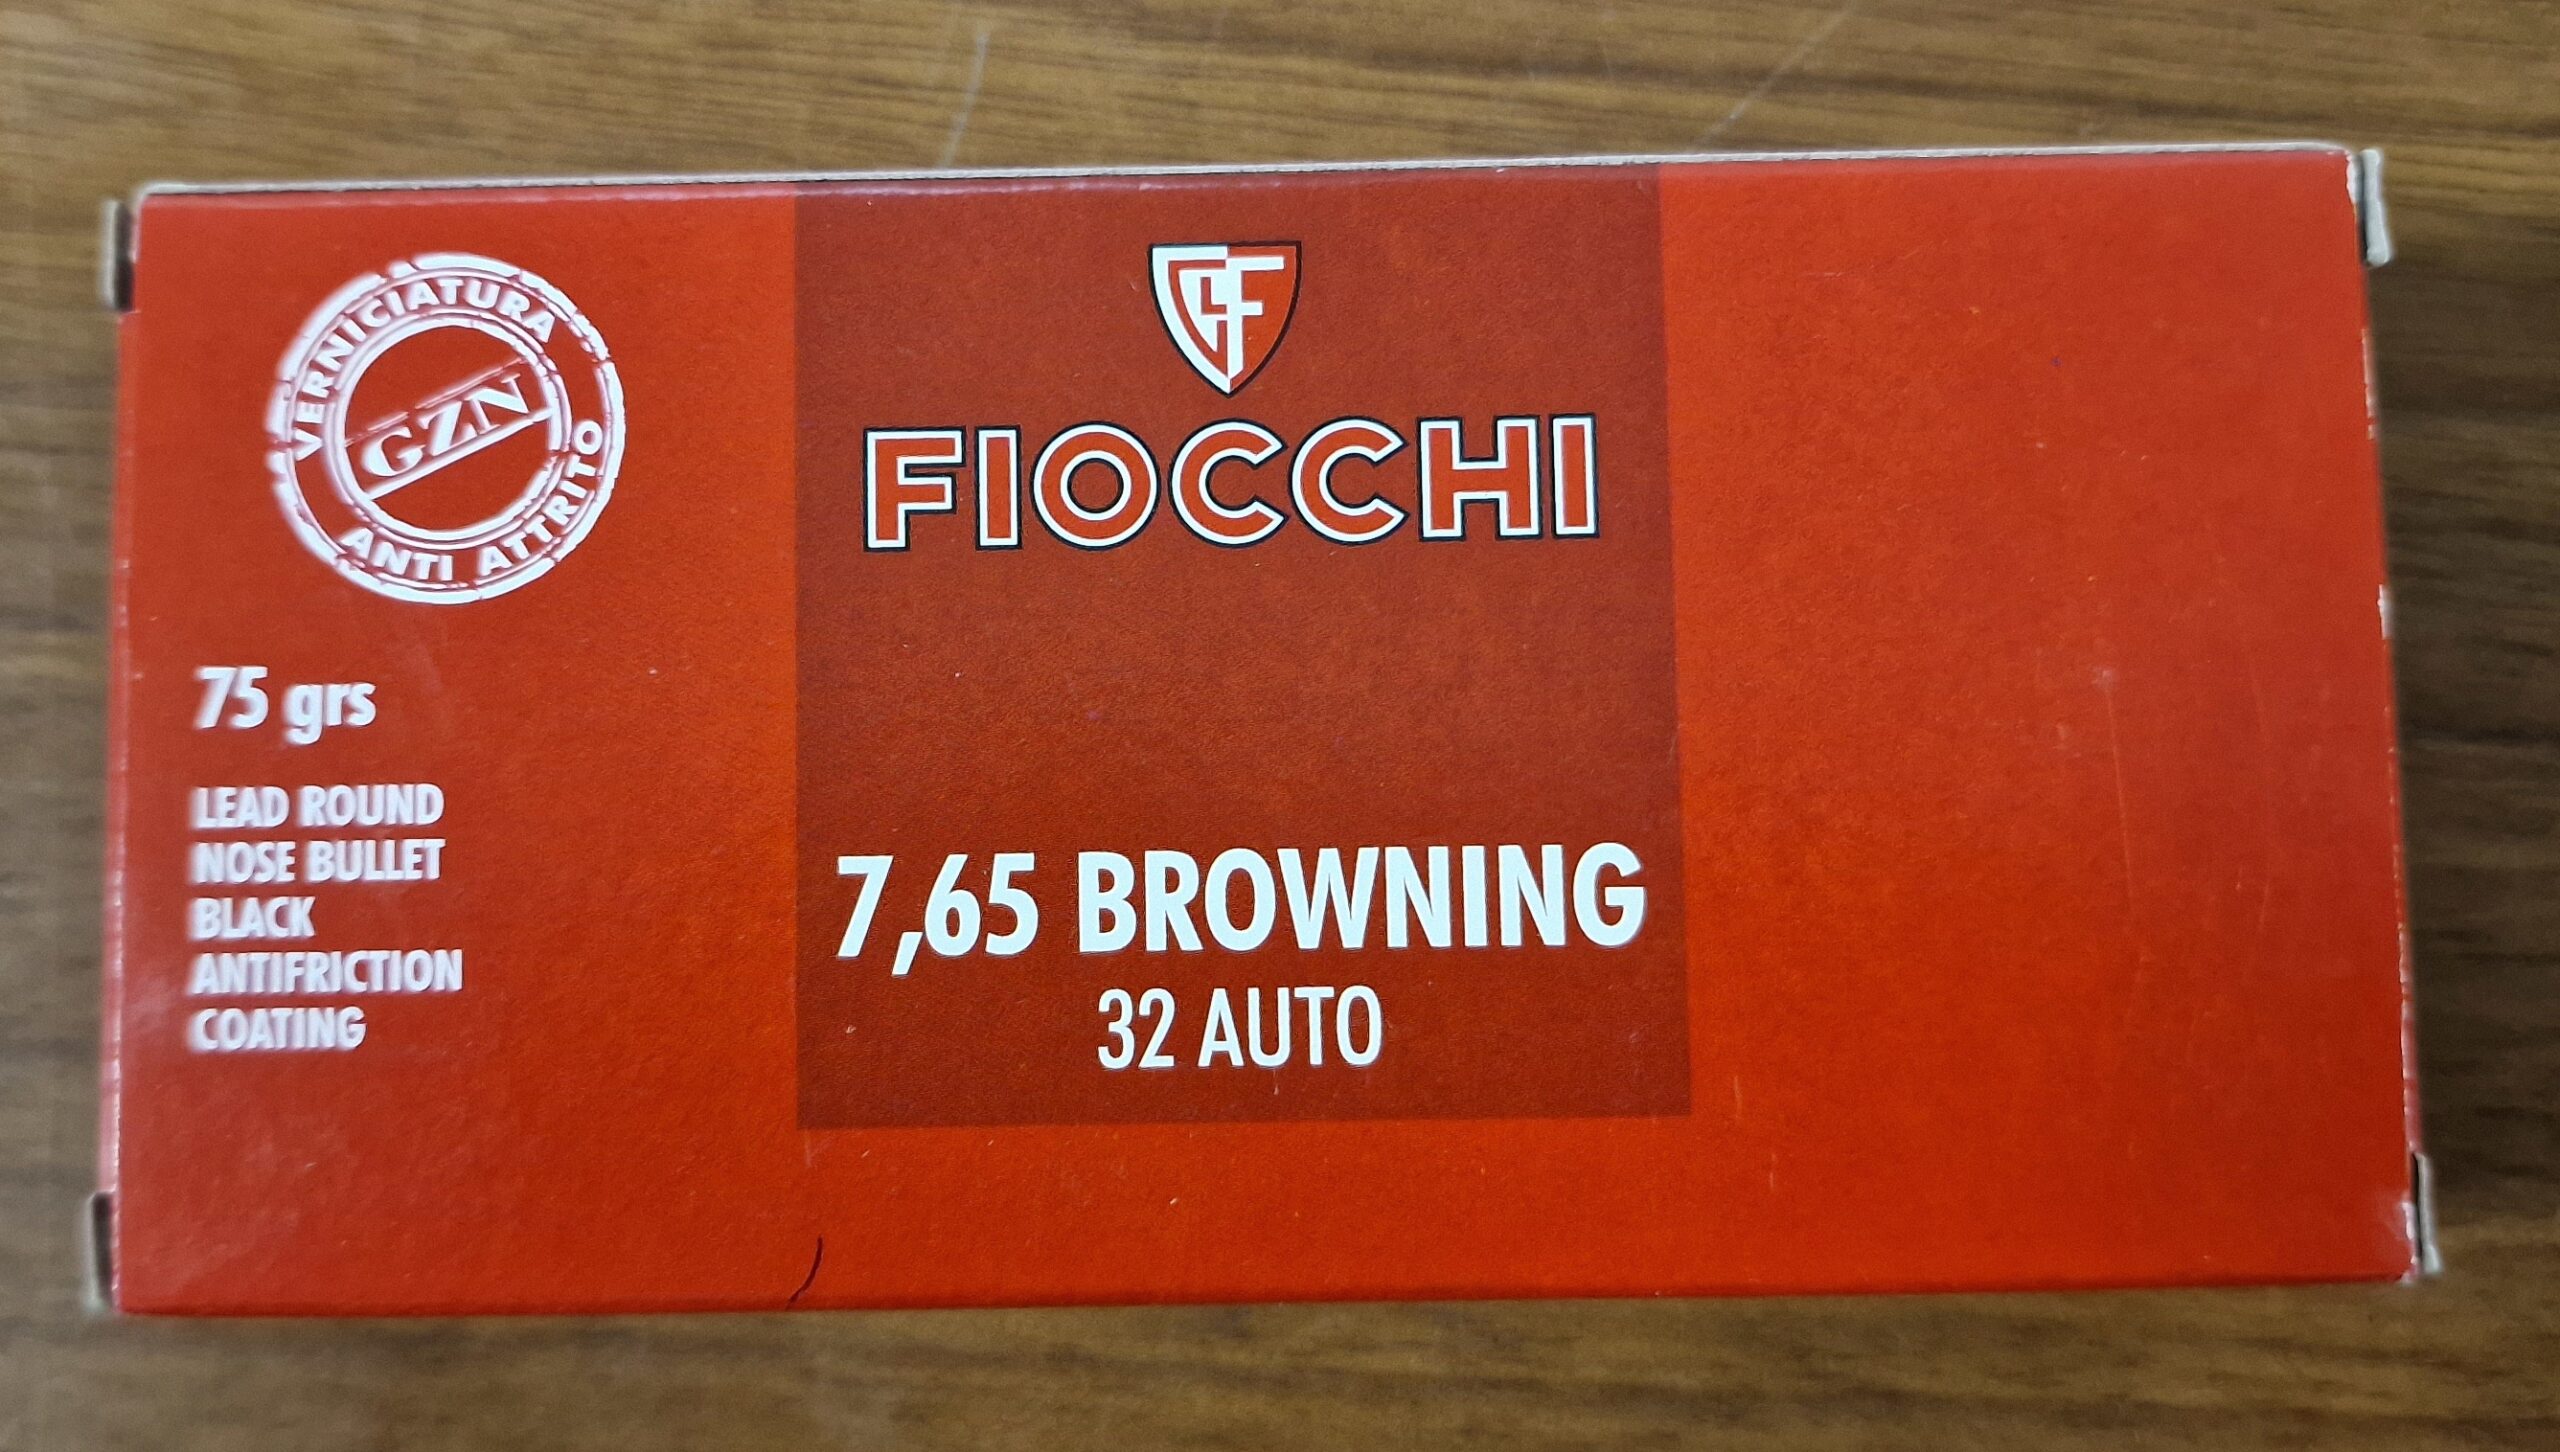 Fiocchi 7,65 browning - 32 auto main image